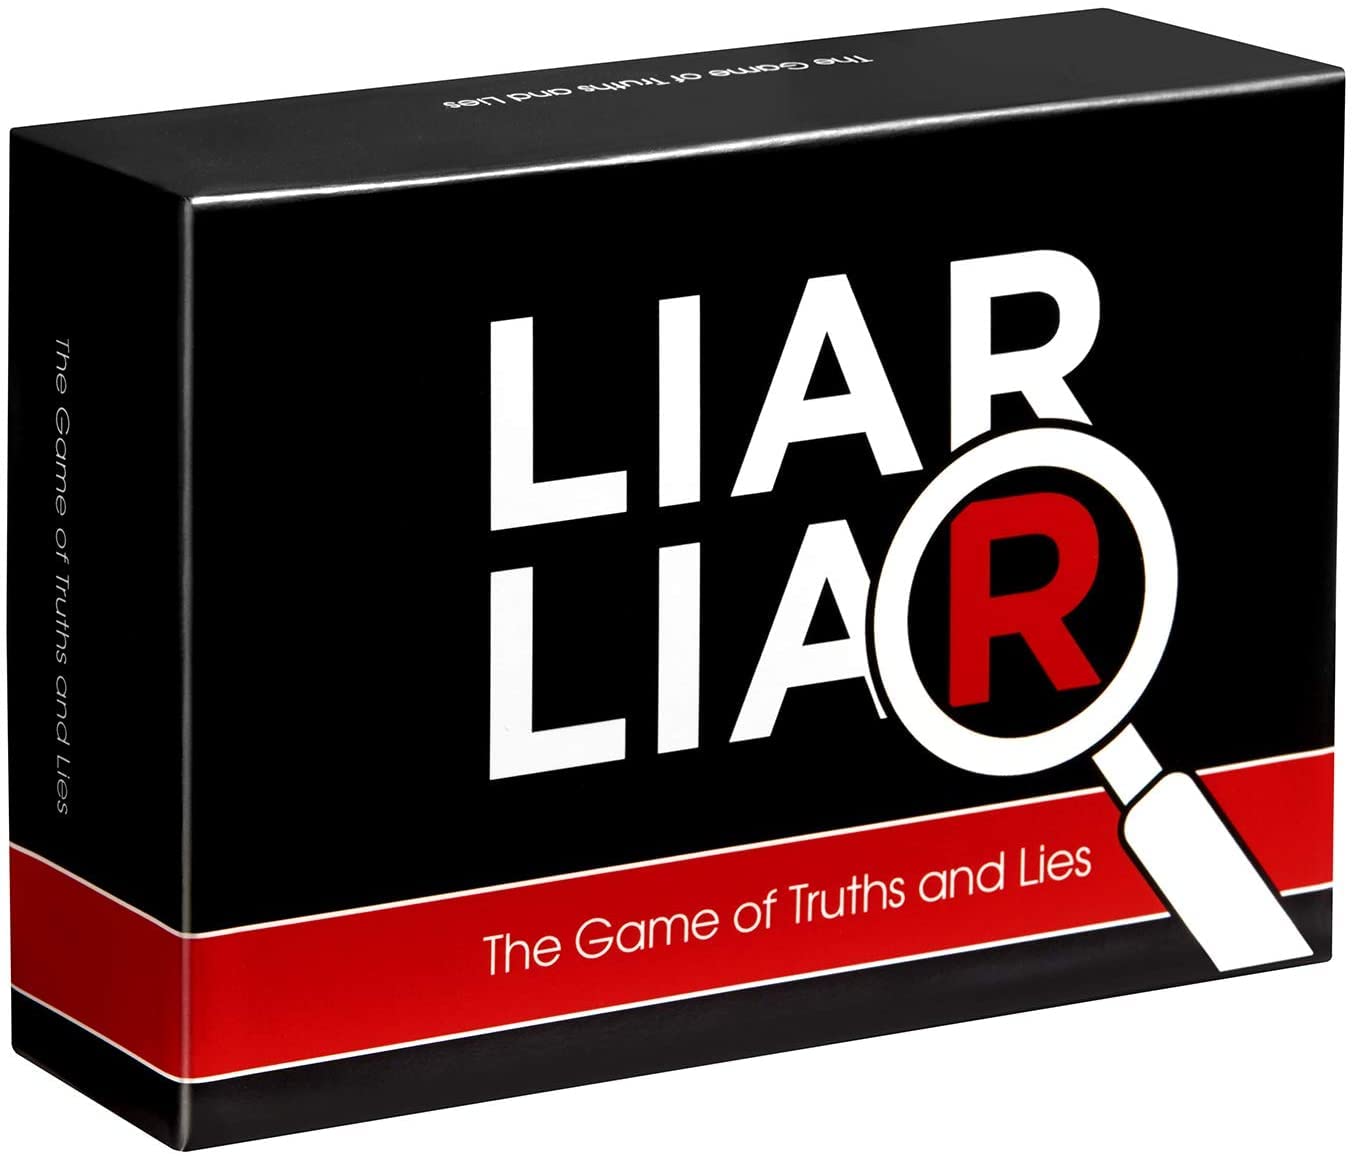 LIAR LIAR - The game of Truths and Lies - Family Friendly card game for All Ages